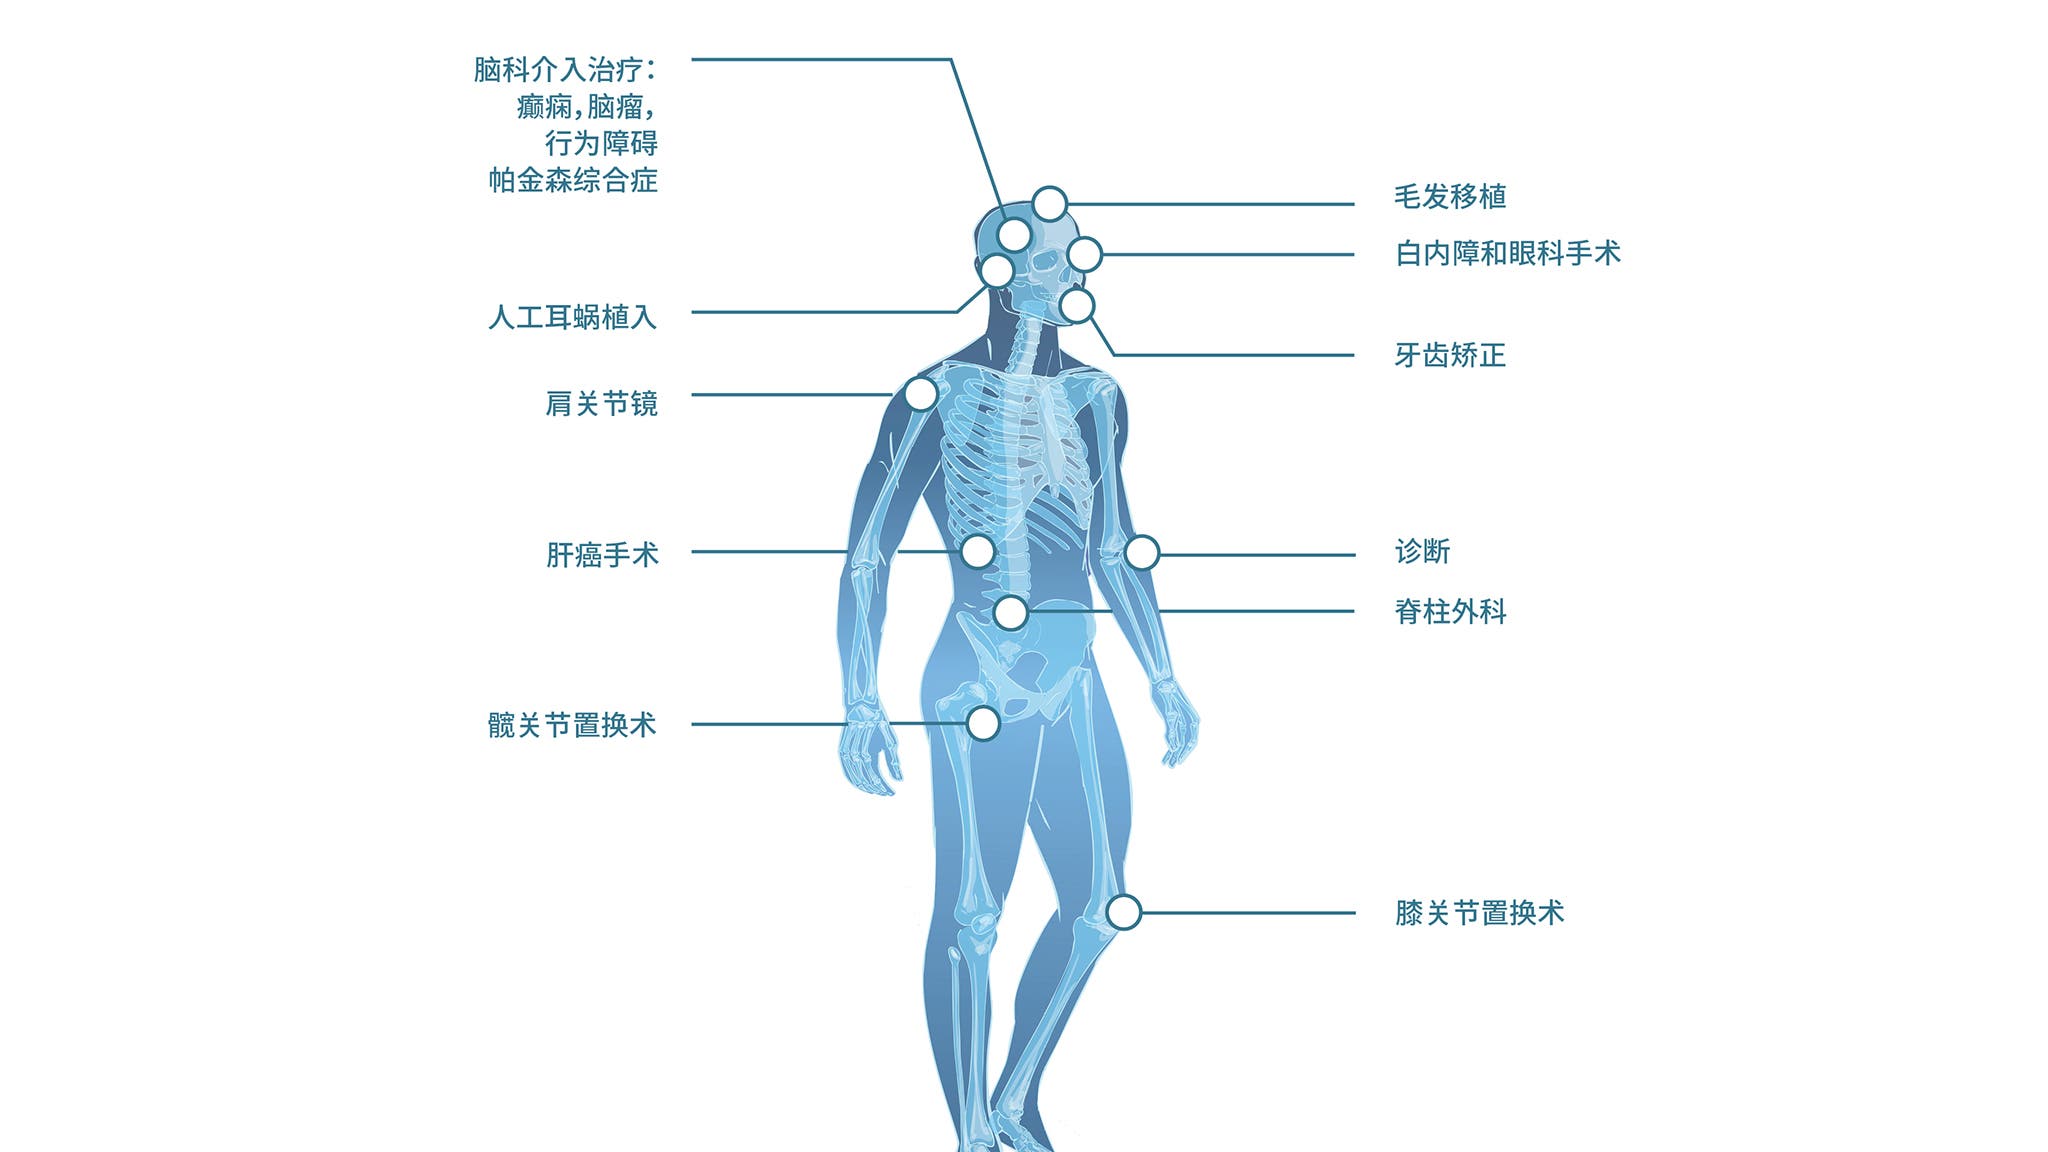 Robotics medical our references - zh